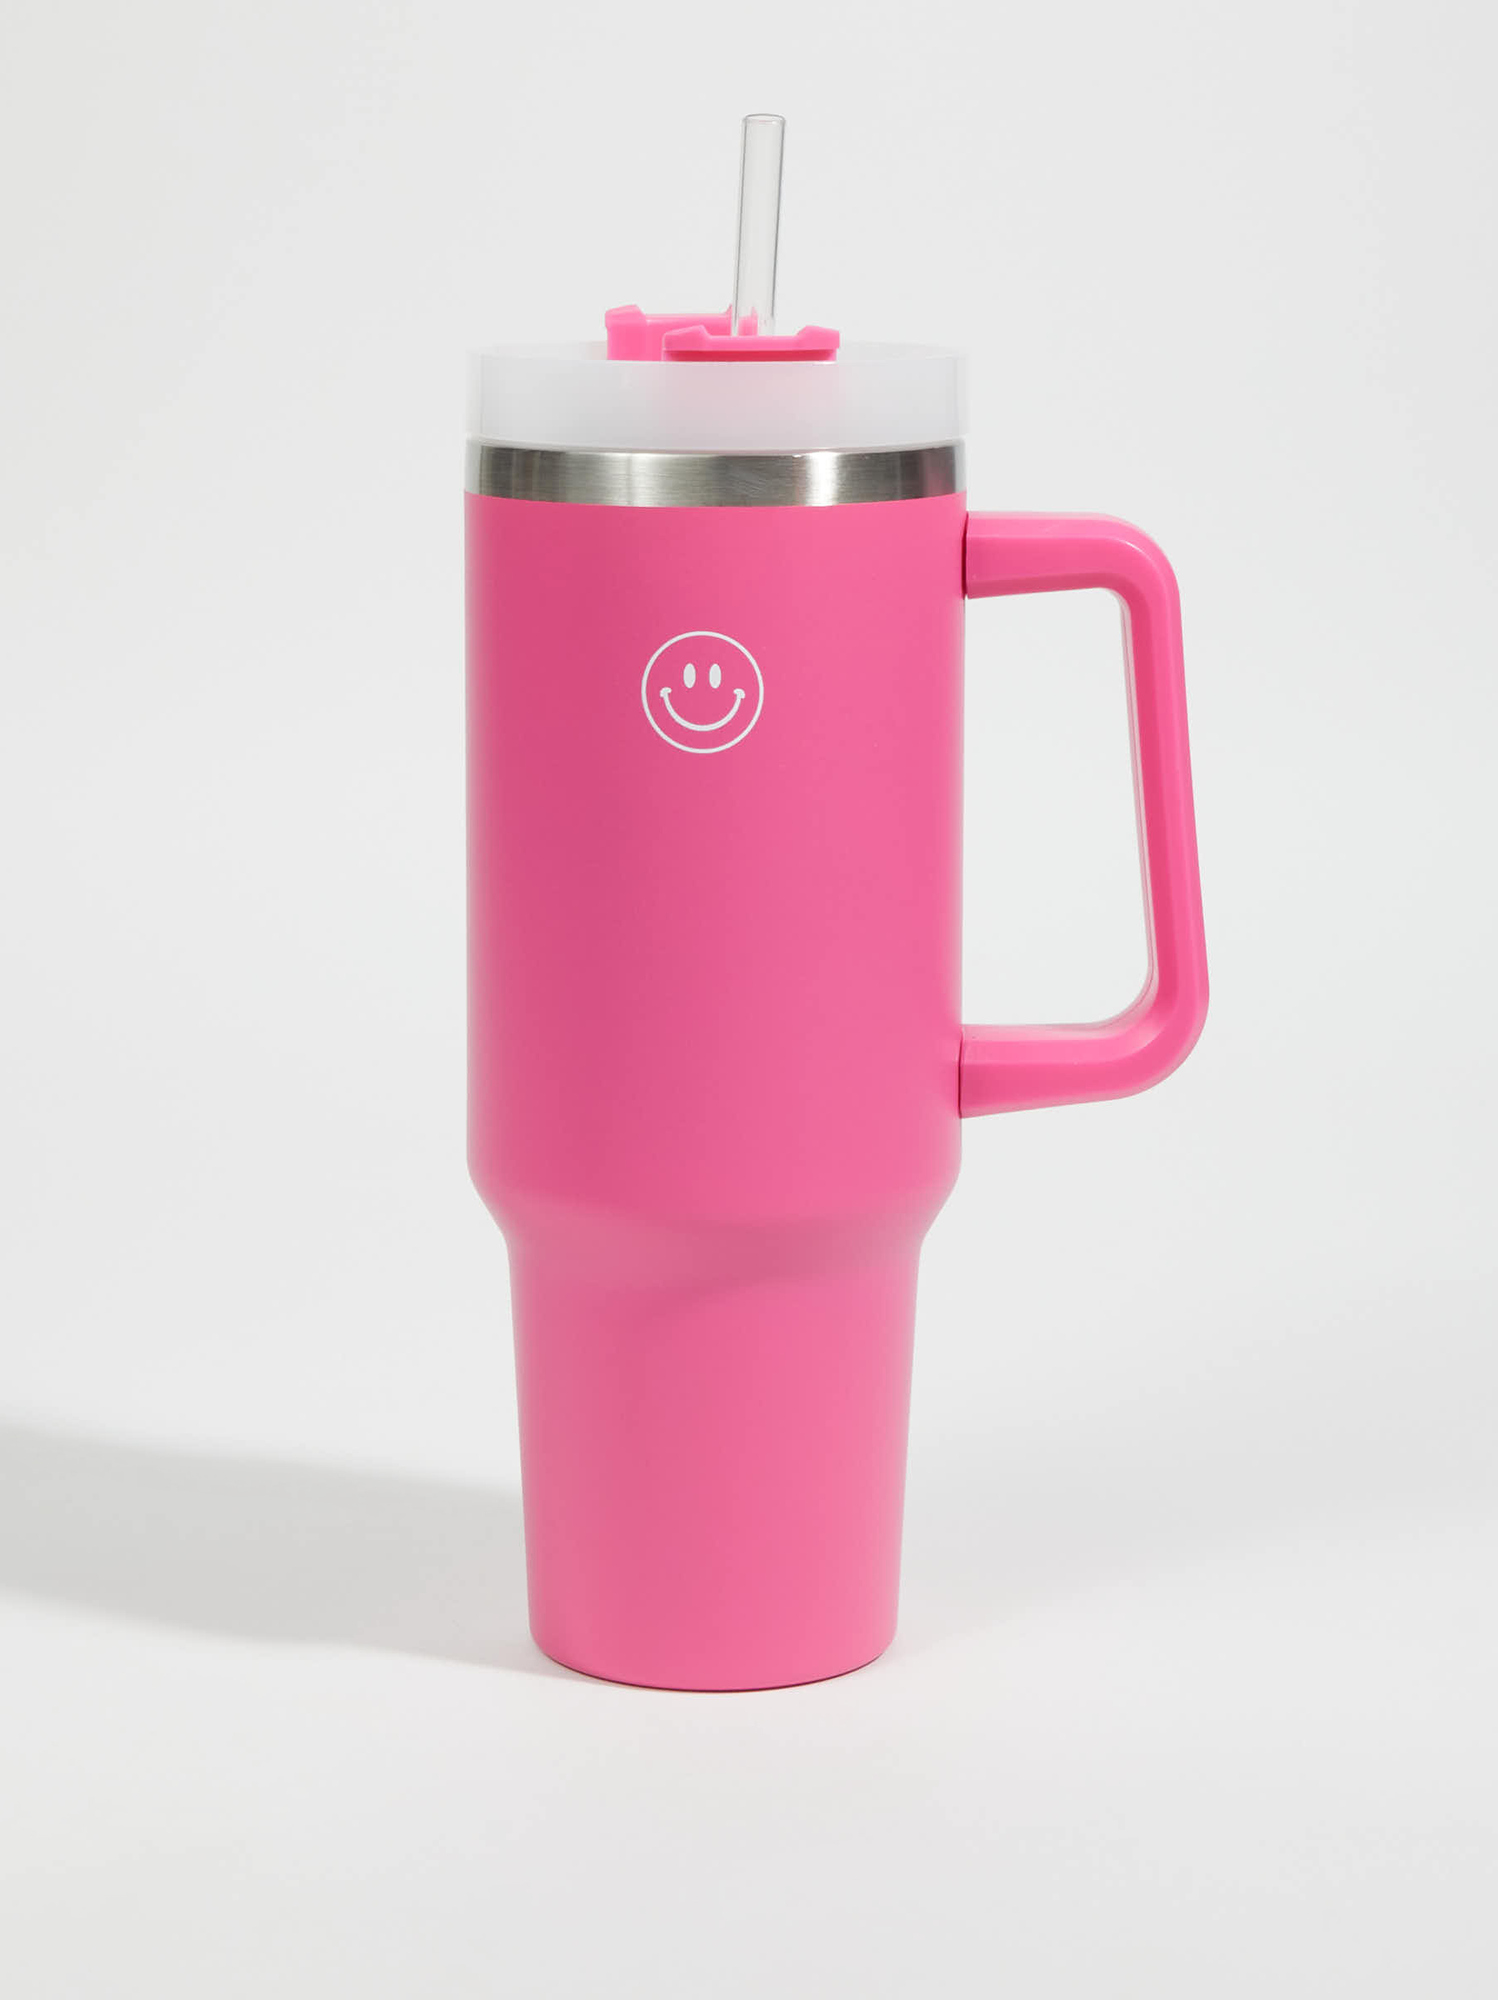 Smiley Face Printed Liv 40 oz Insulated Cup with Handle in Pink